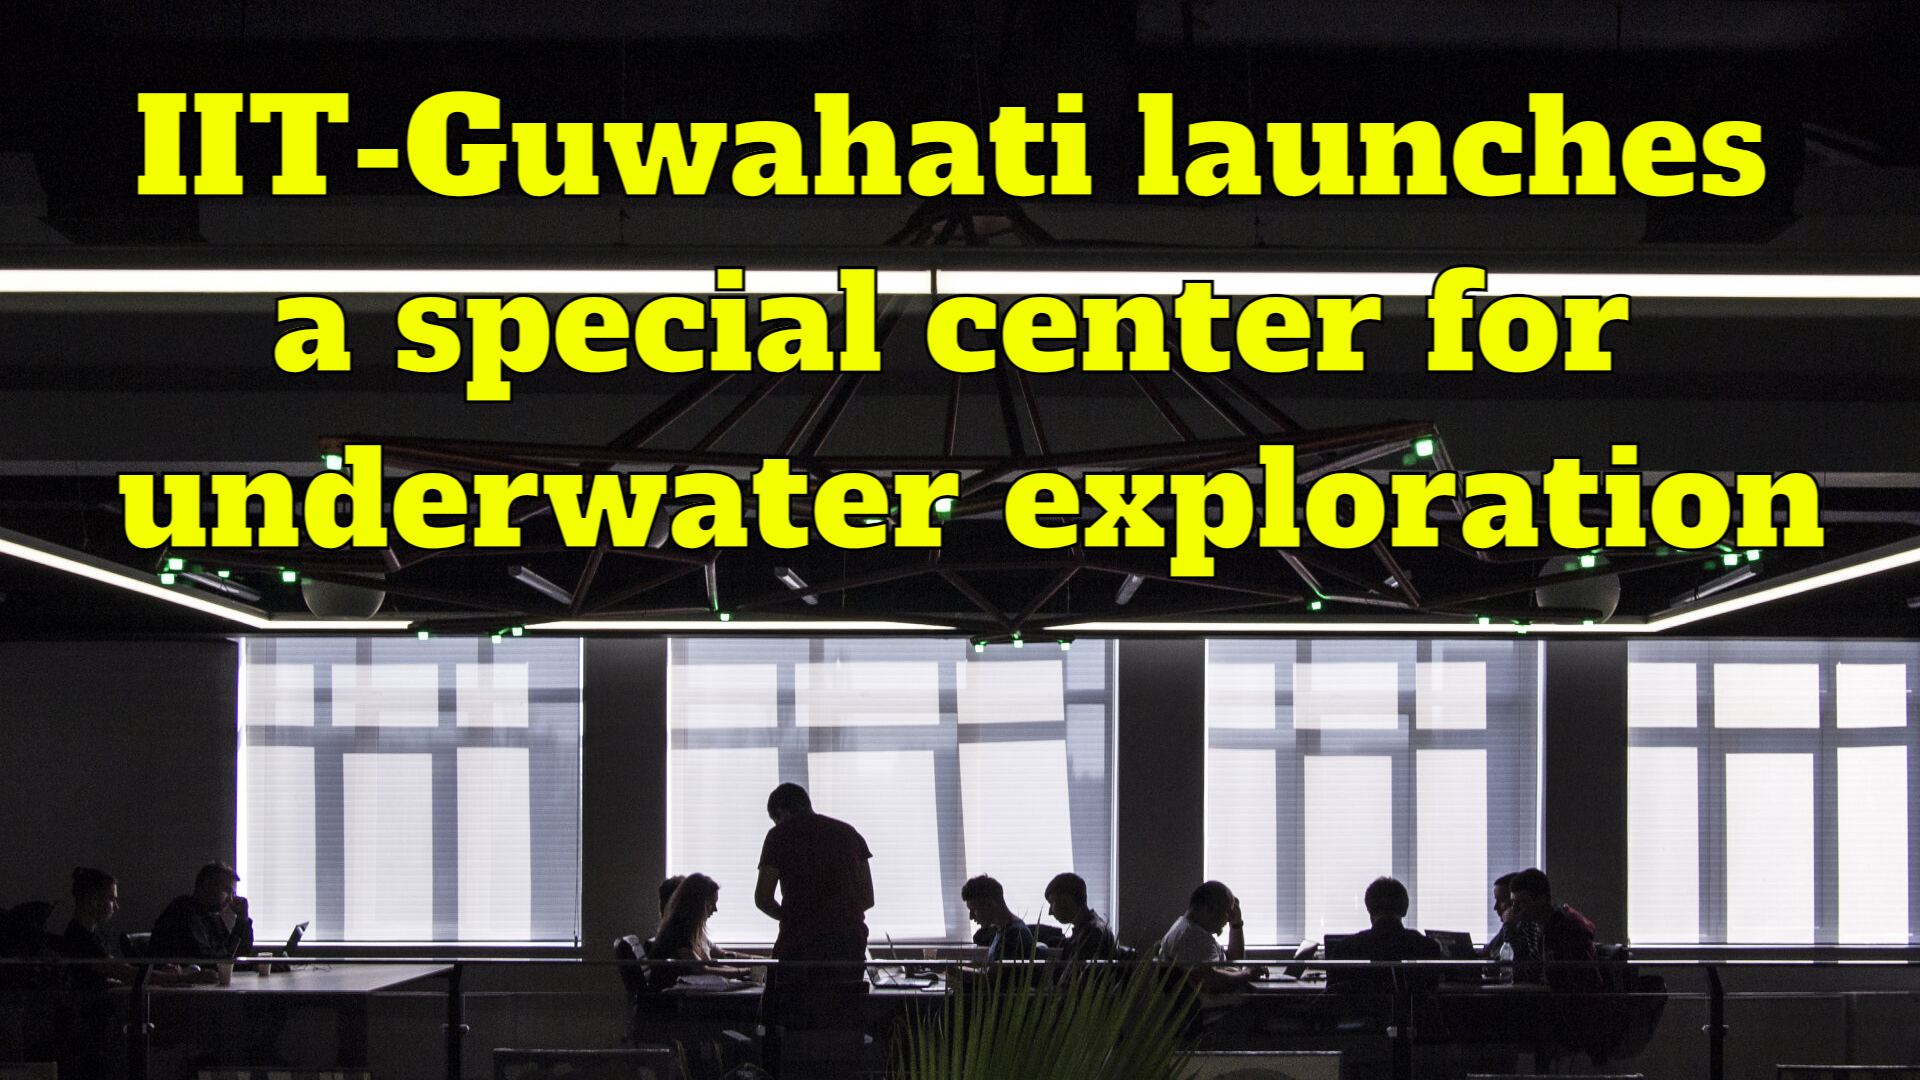 IIT-Guwahati launches a special center for researching underwater exploration